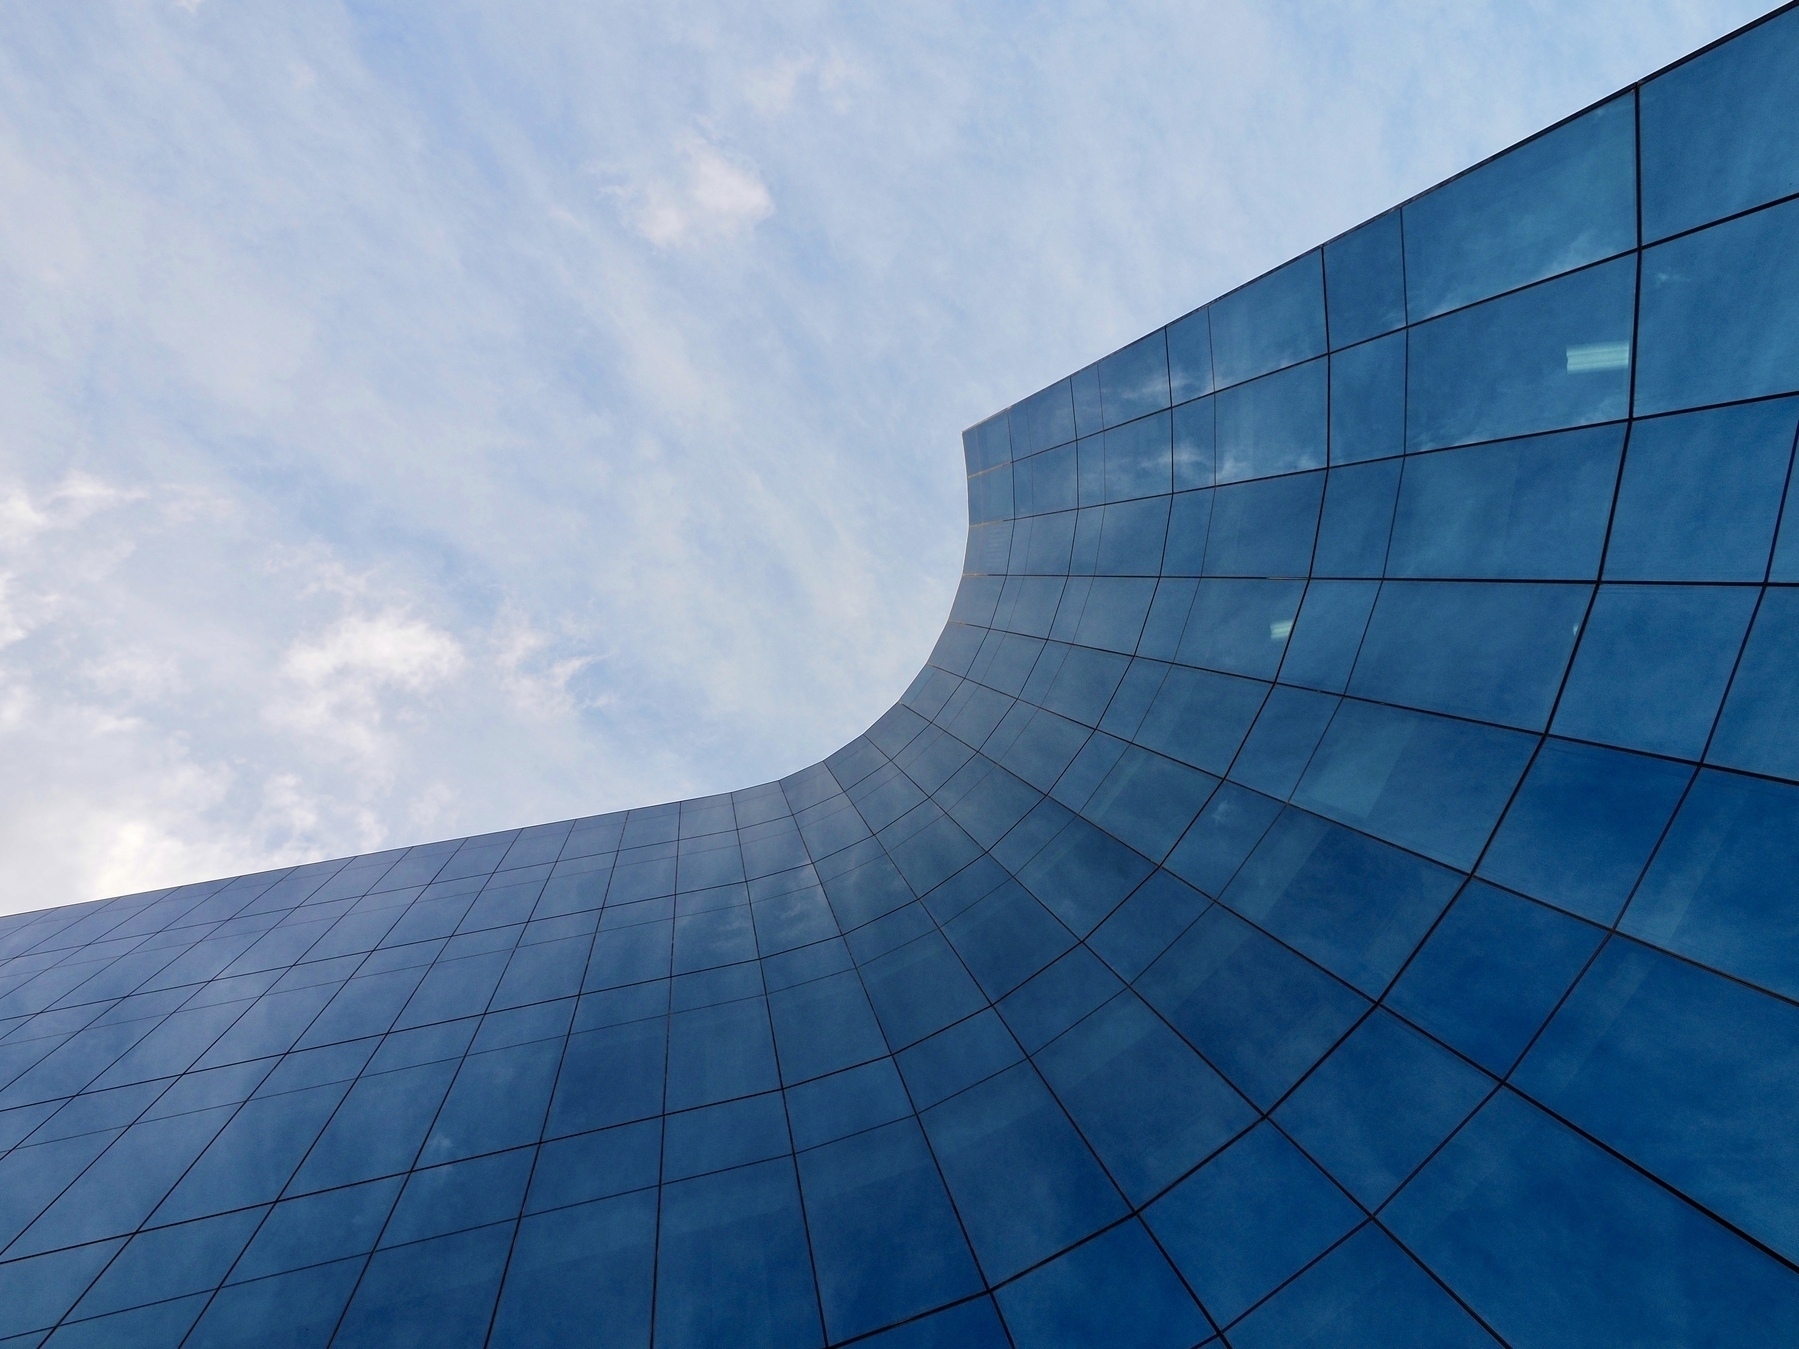 Looking up at a curved building with blue glass windows, with the sky above